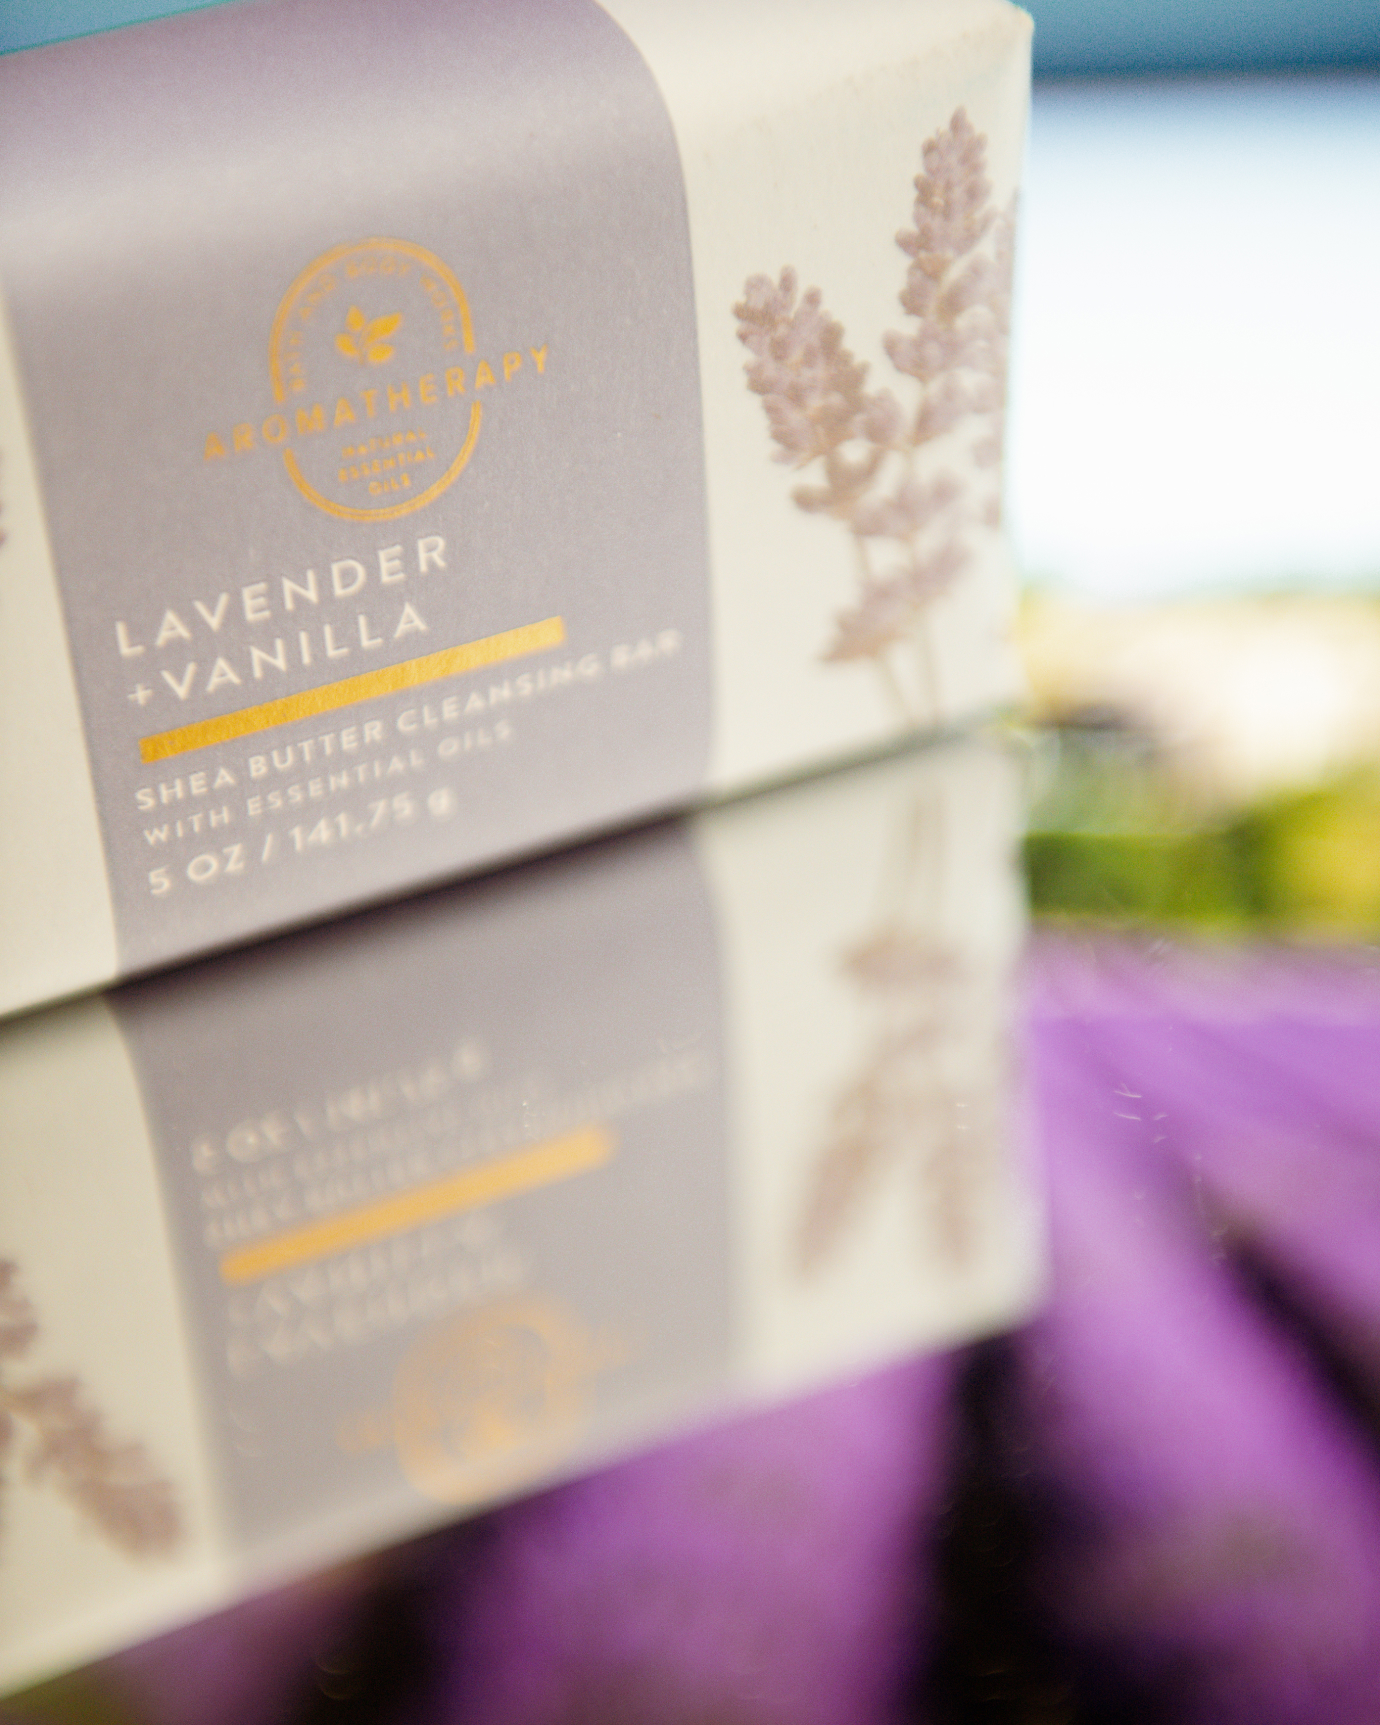 Lavender + Vanilla Shea butter cleansing bar with essential oils.